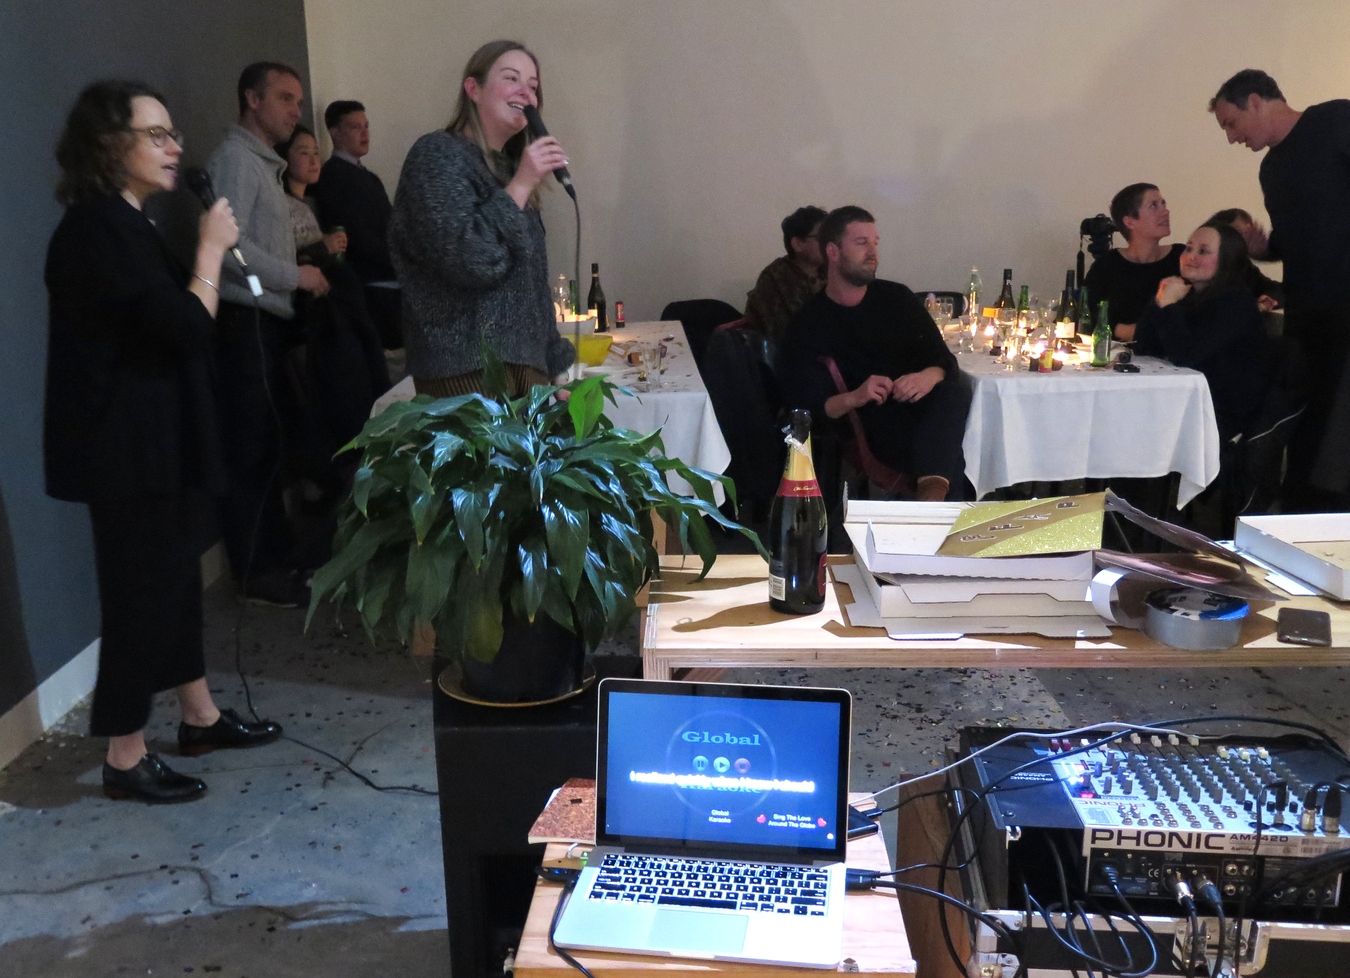 An exciting finalé to the evening as guests party the night away with Youtube karaoke and the gallery PA system.